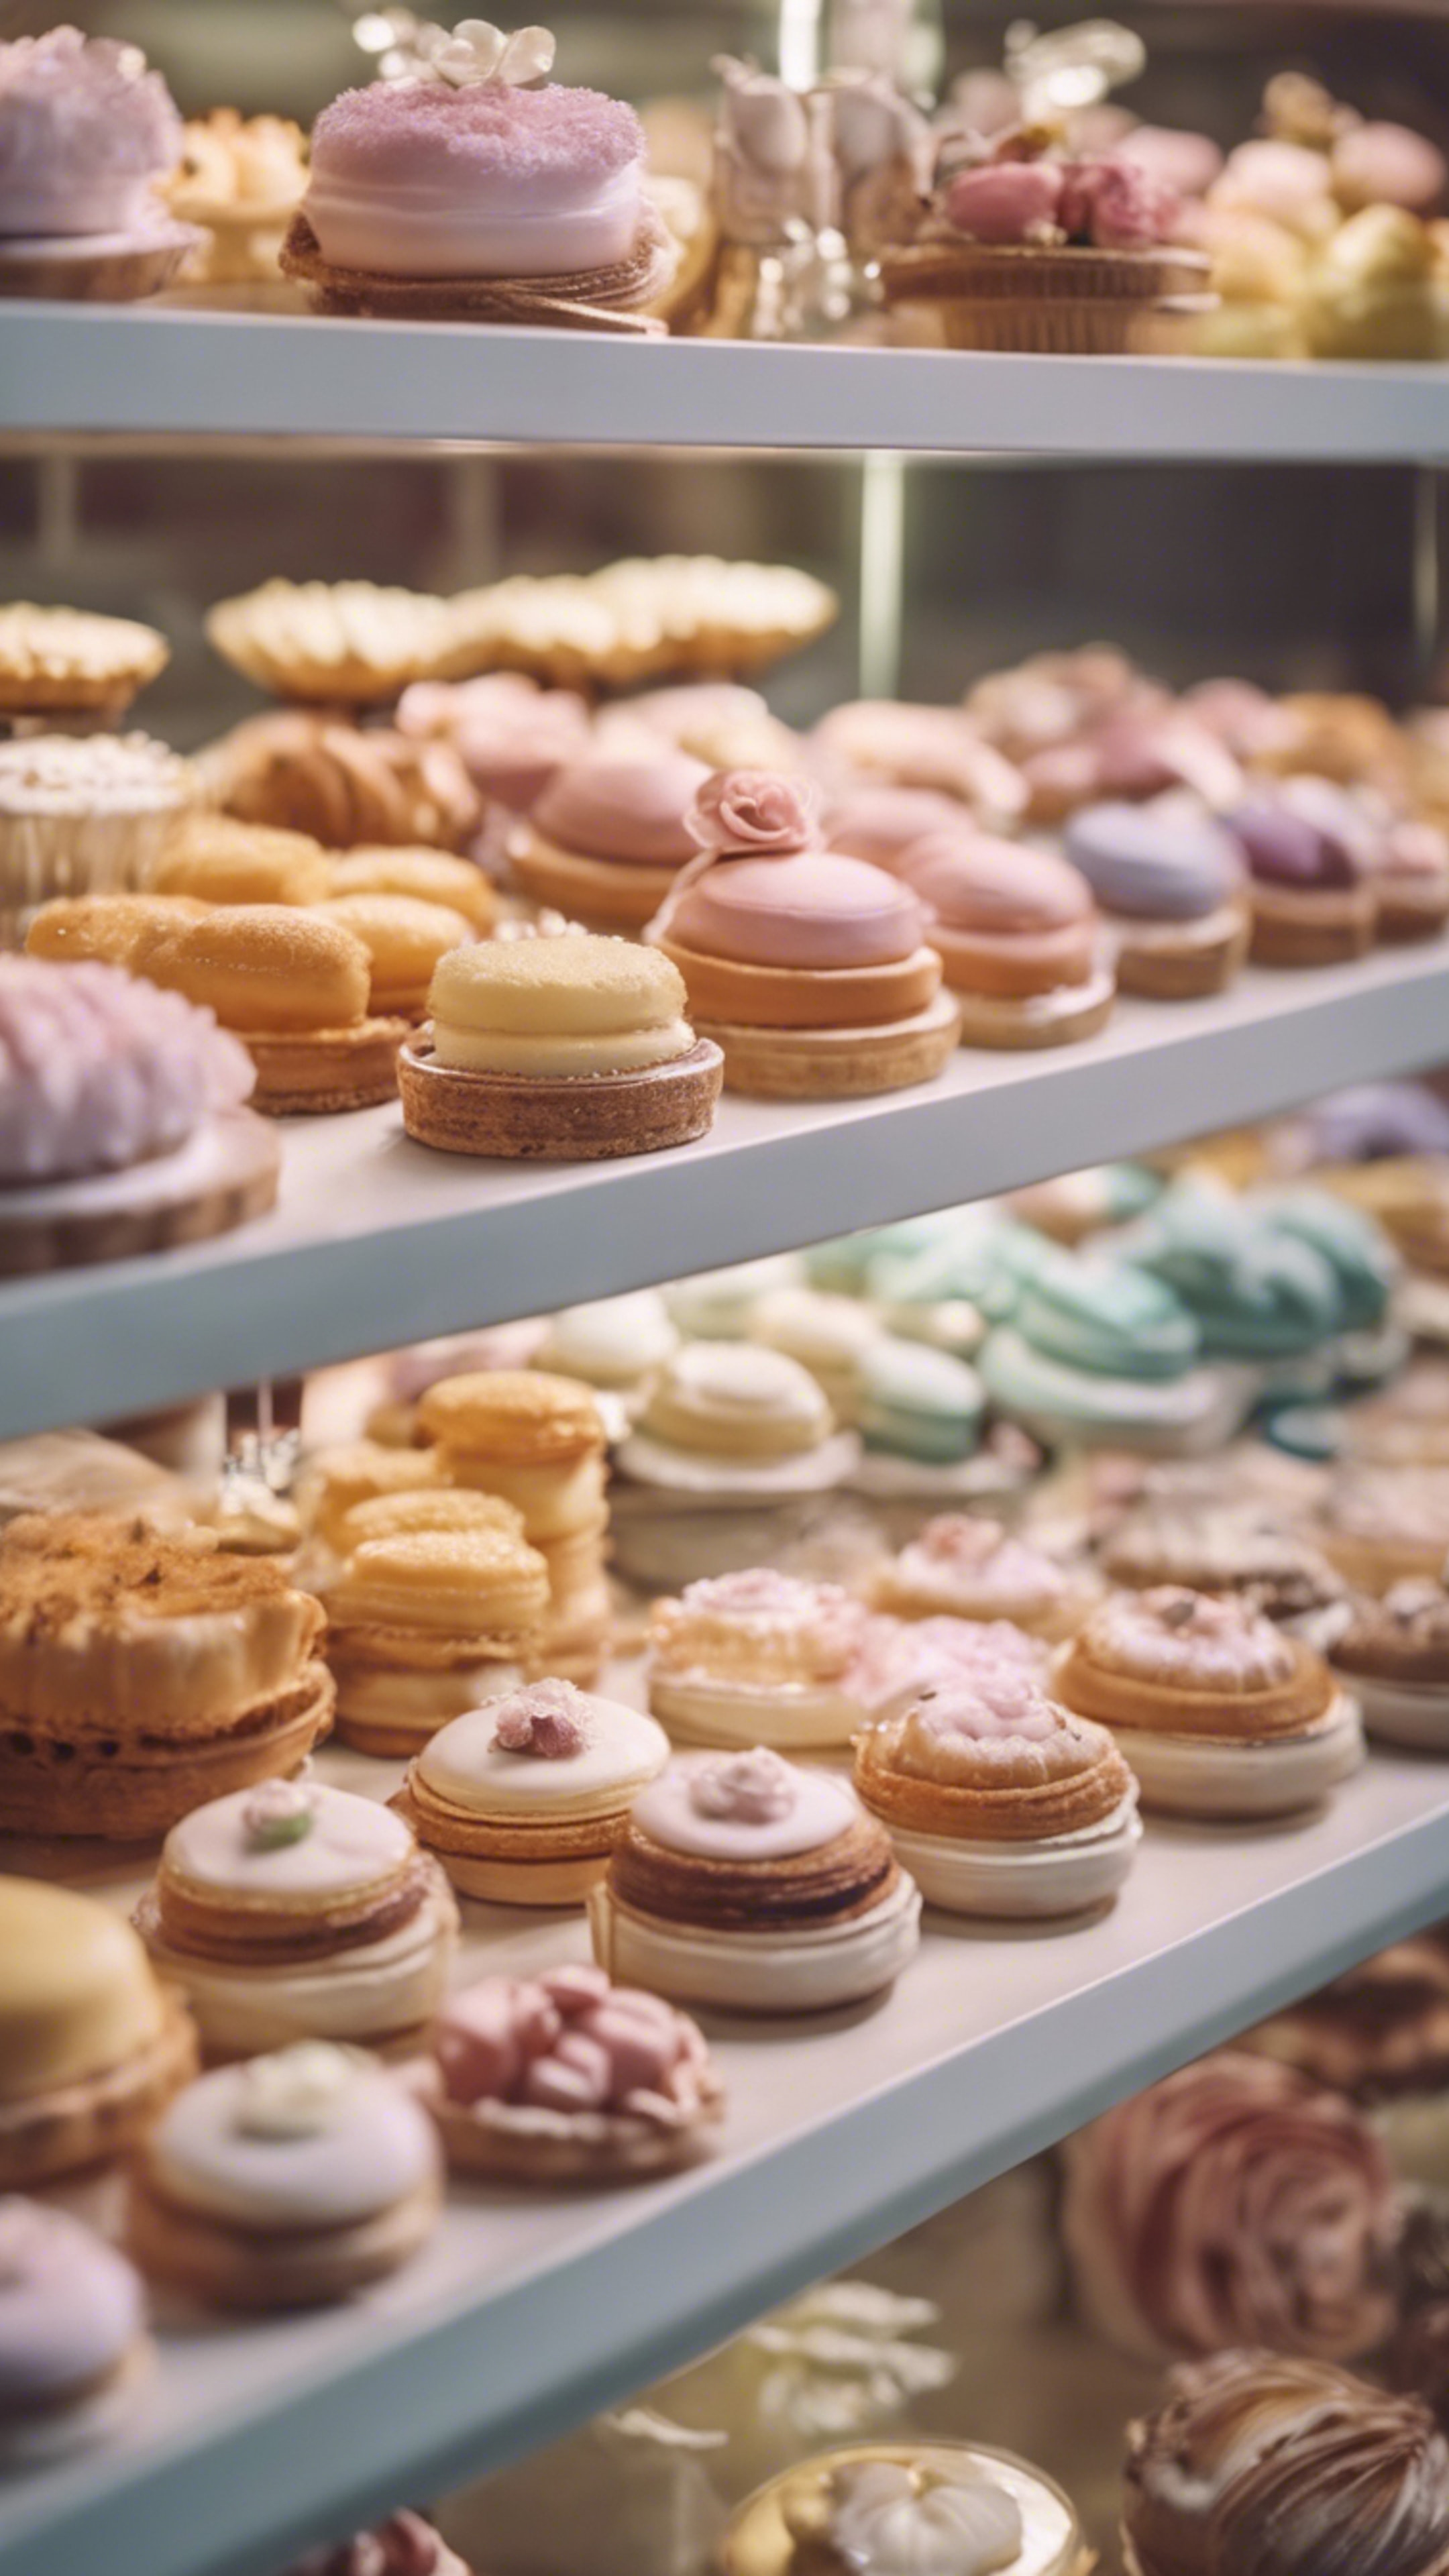 A classic French patisserie in pastel colors, filled with elegantly fashioned cakes and pastries. Обои[85bb484f9d7f40c5ac29]